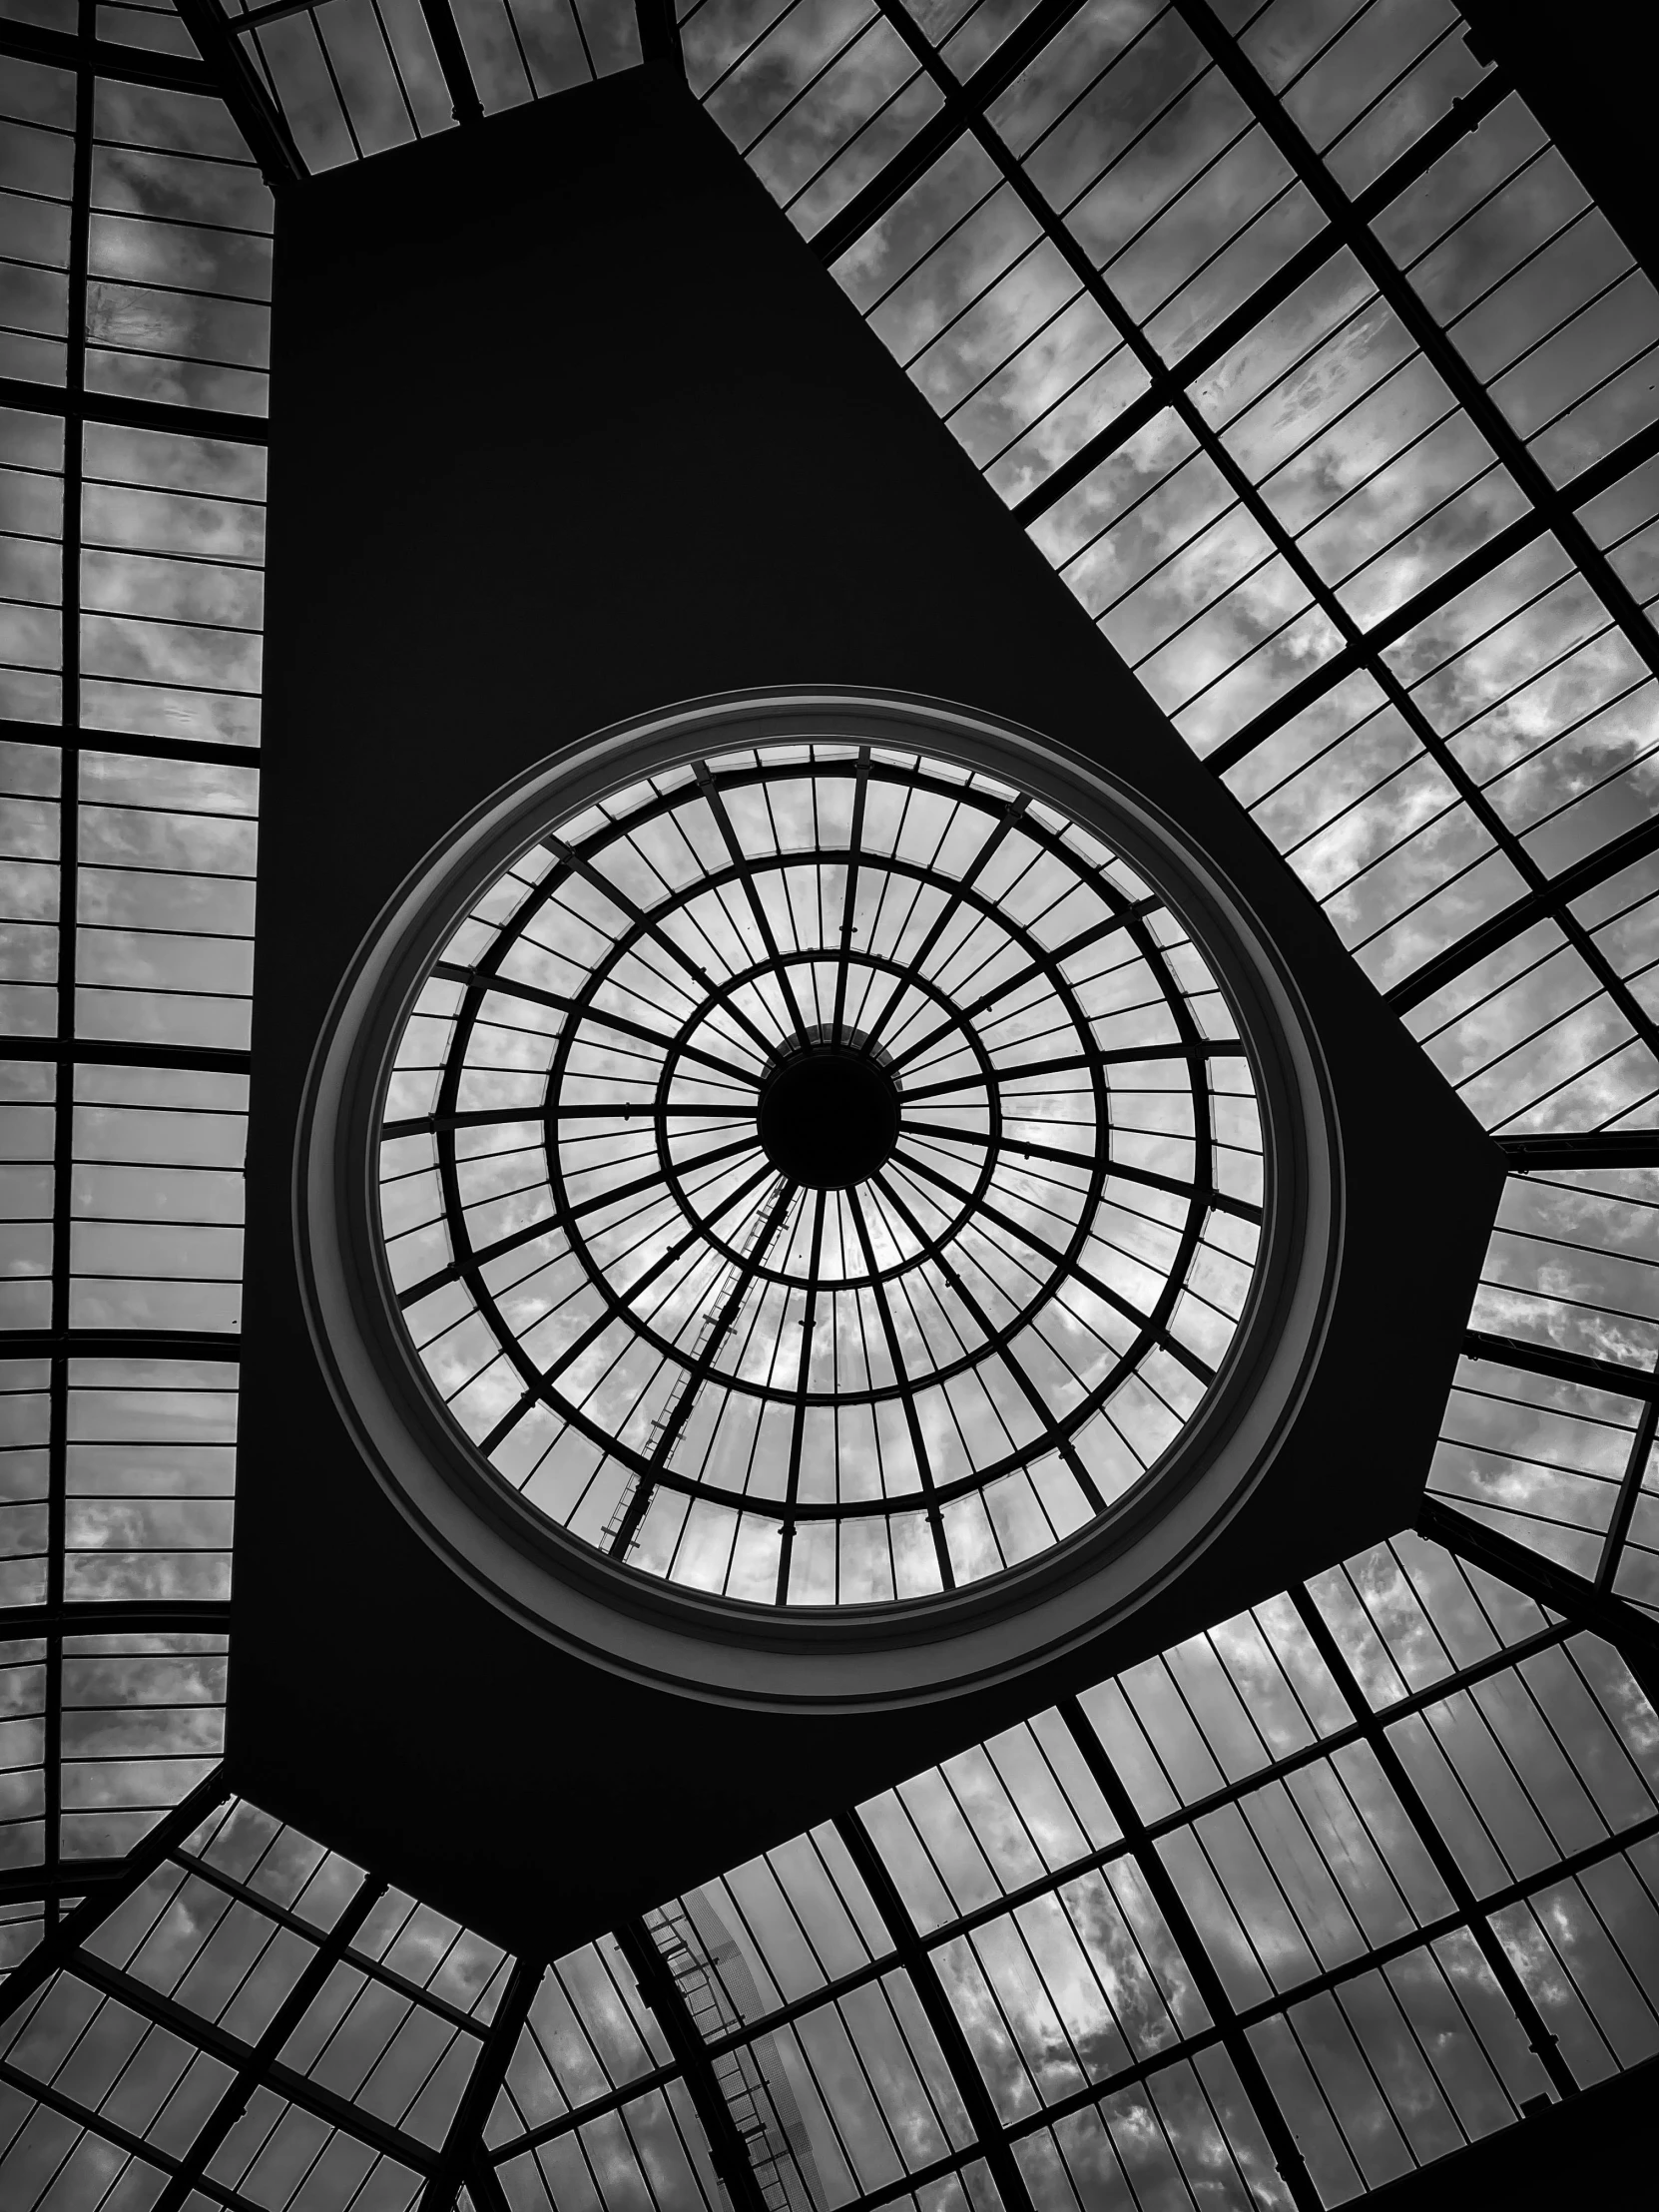 a black and white photo of a glass ceiling, by Patrick Pietropoli, large round window, 82 mm sigma art -, art deco!!, maxim verehin stained glass